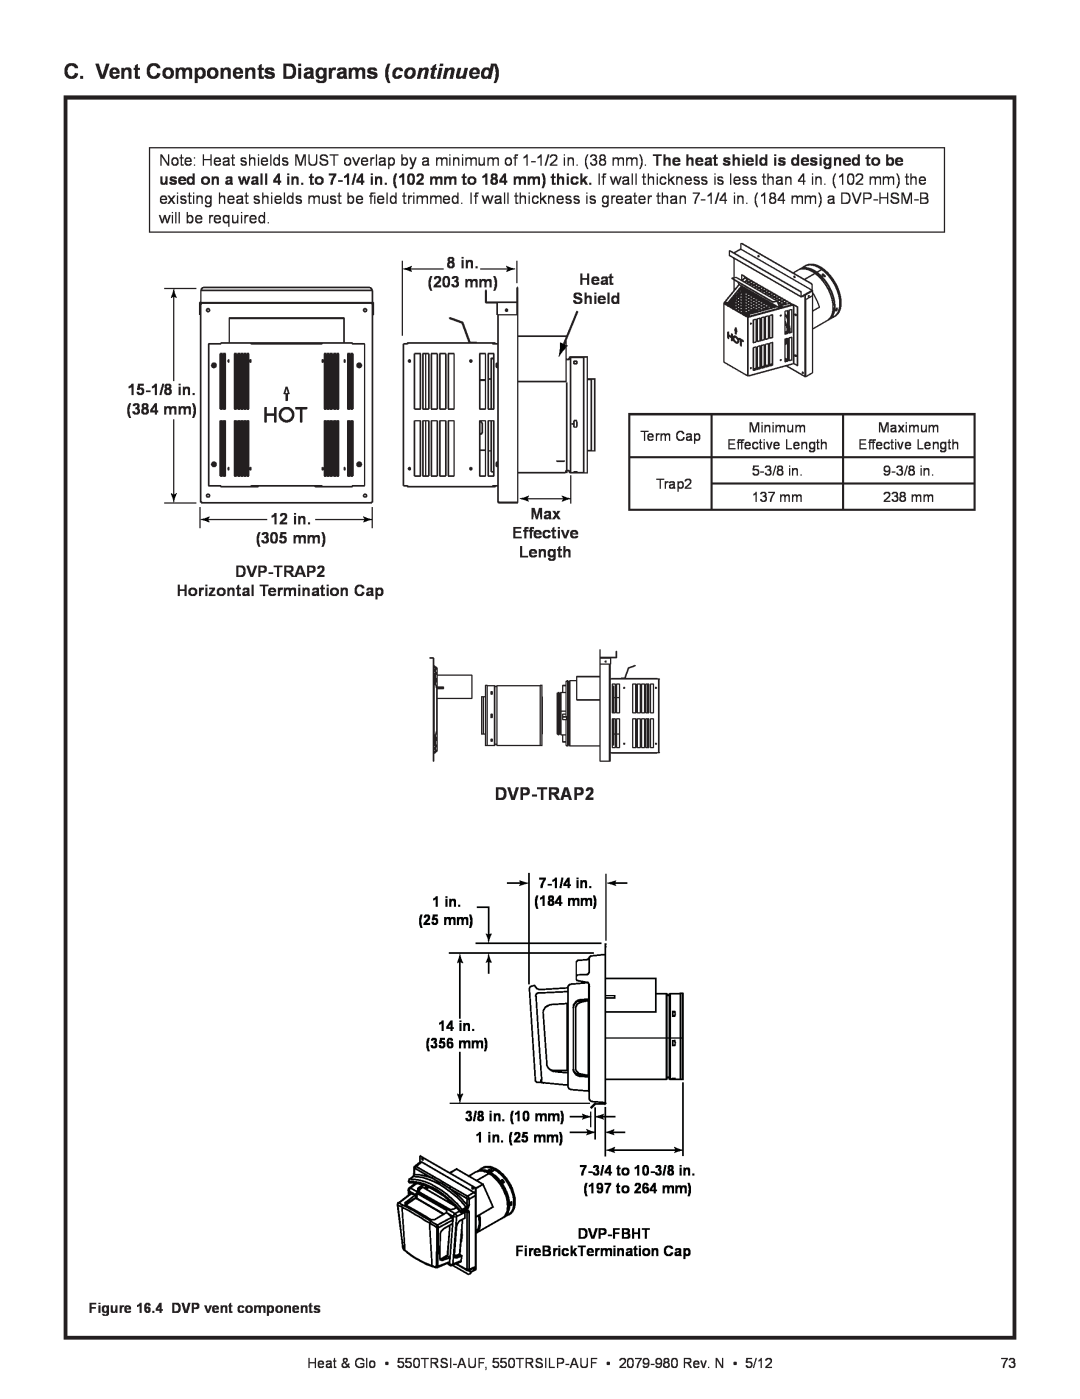 Heat & Glo LifeStyle 550TRSI-AUF C. Vent Components Diagrams continued, DVP-TRAP2, 8 in 203 mm Heat Shield, 15-1/8in 